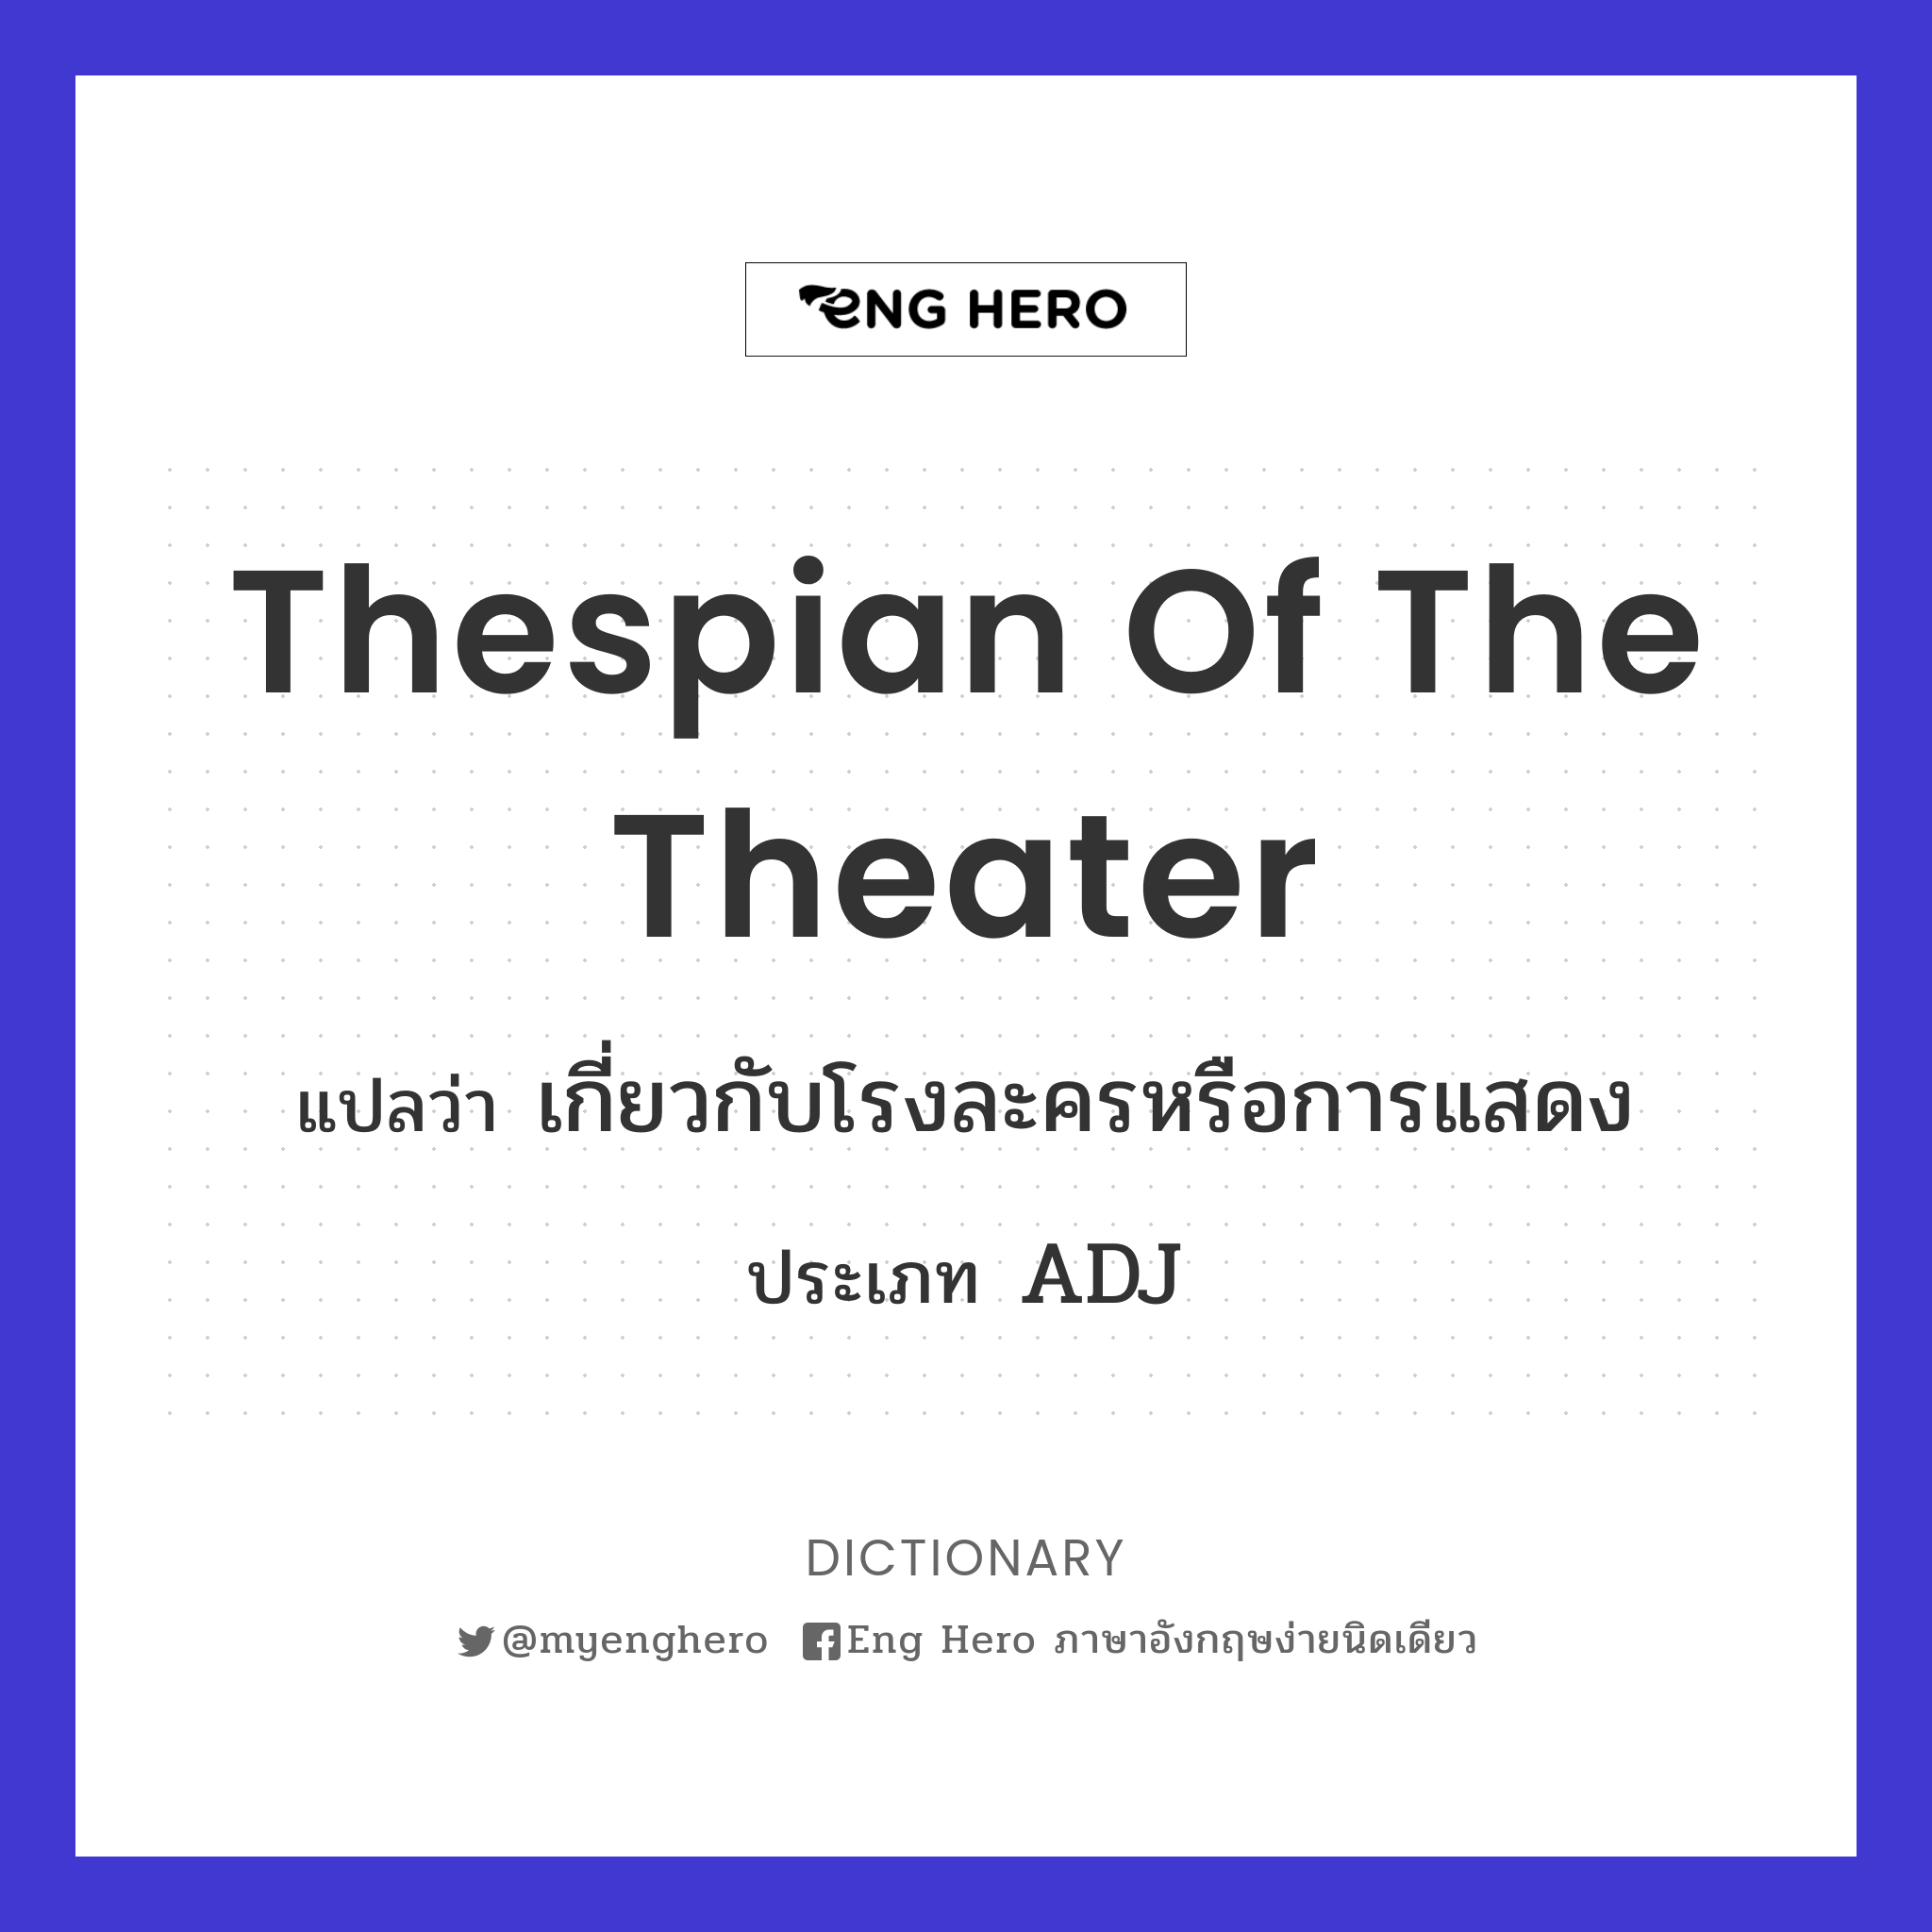 Thespian of the theater